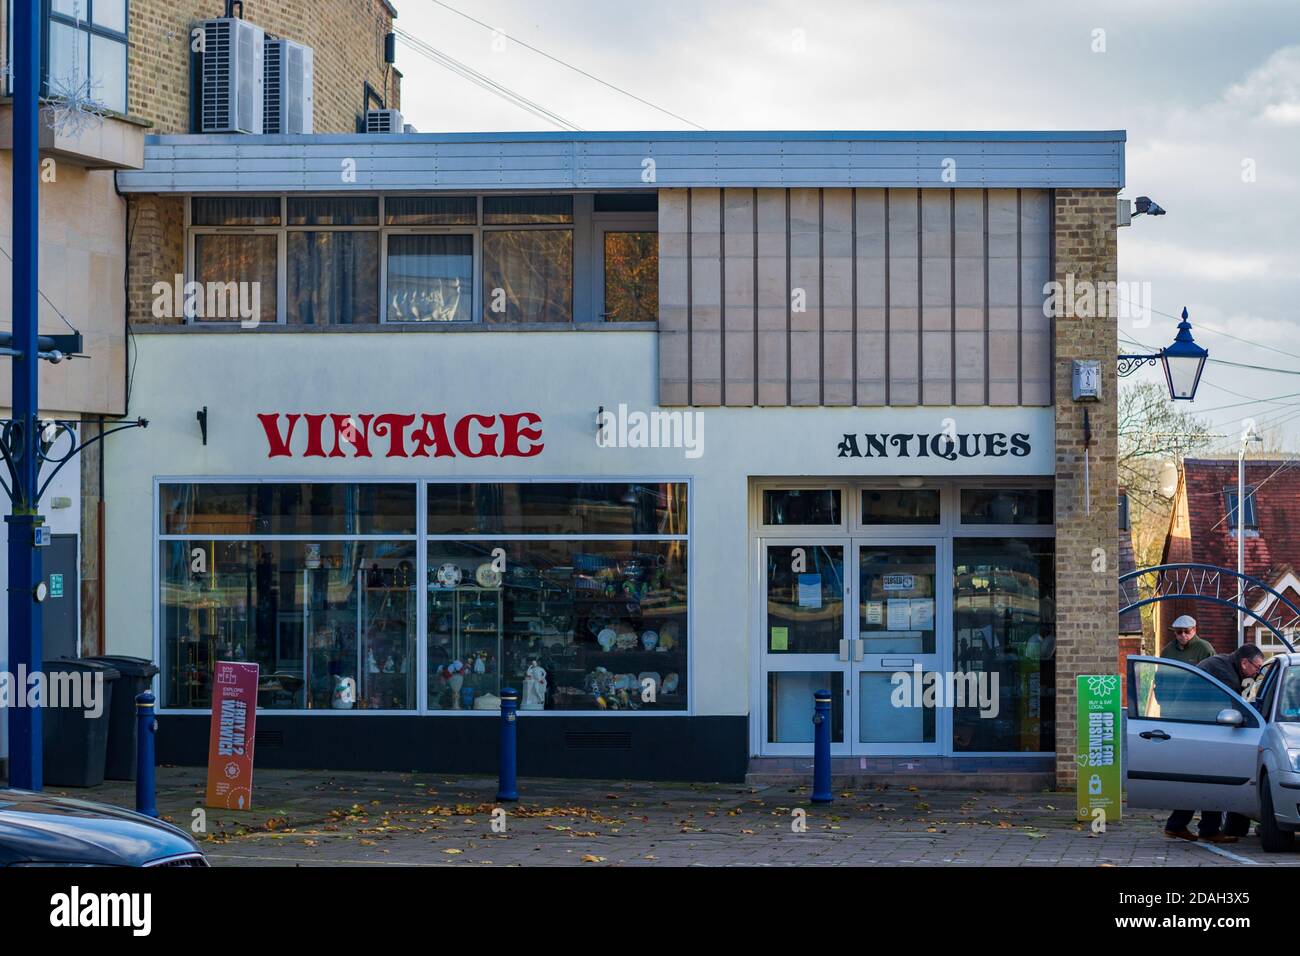 Vintage Antiques Centre in Market Place, Warwick, UK Stock Photo